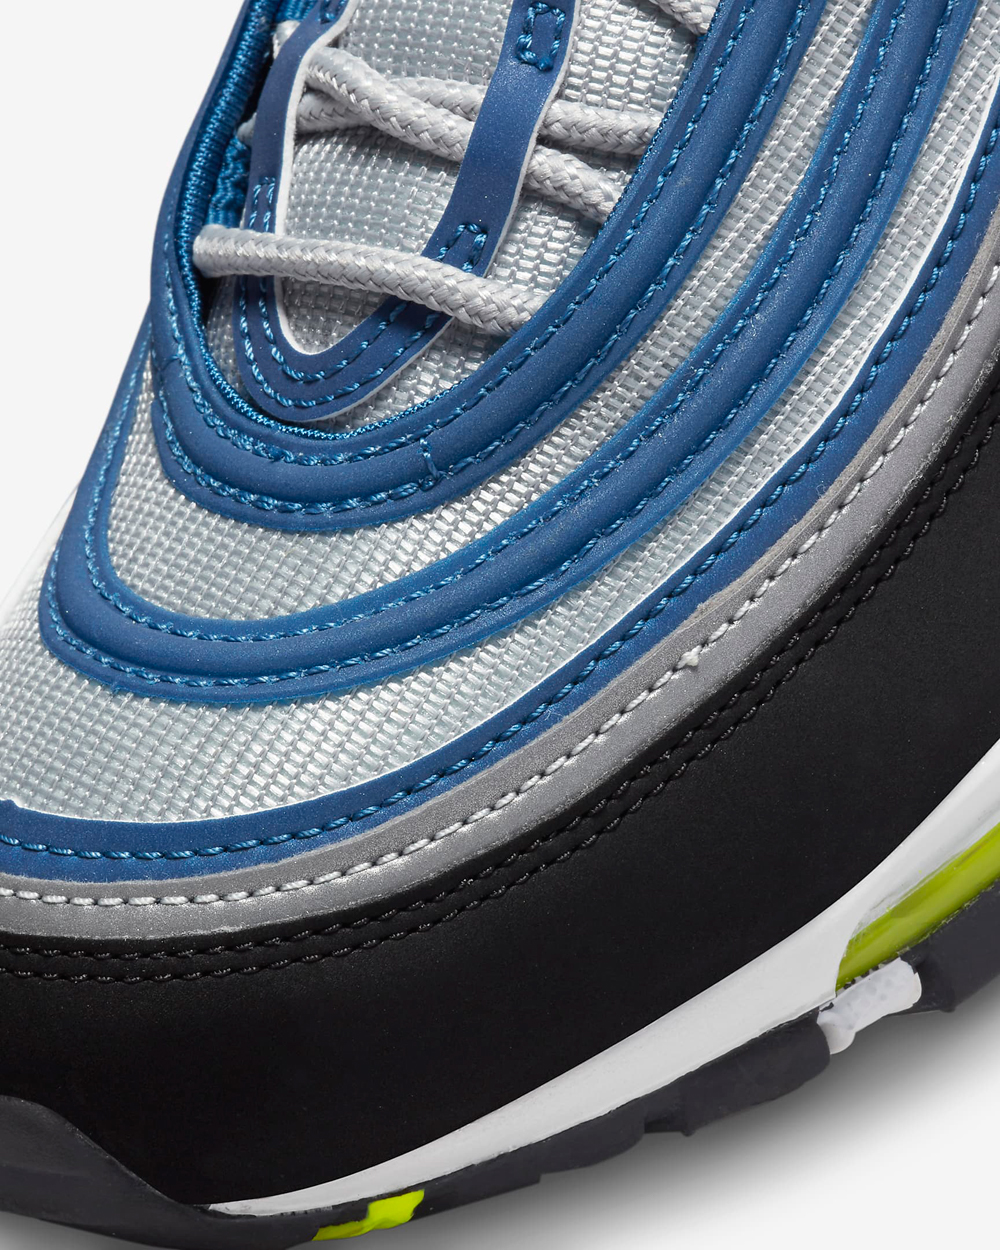 nike-air-max-97-atlantic-blue-voltage-yellow-release-date-info-7